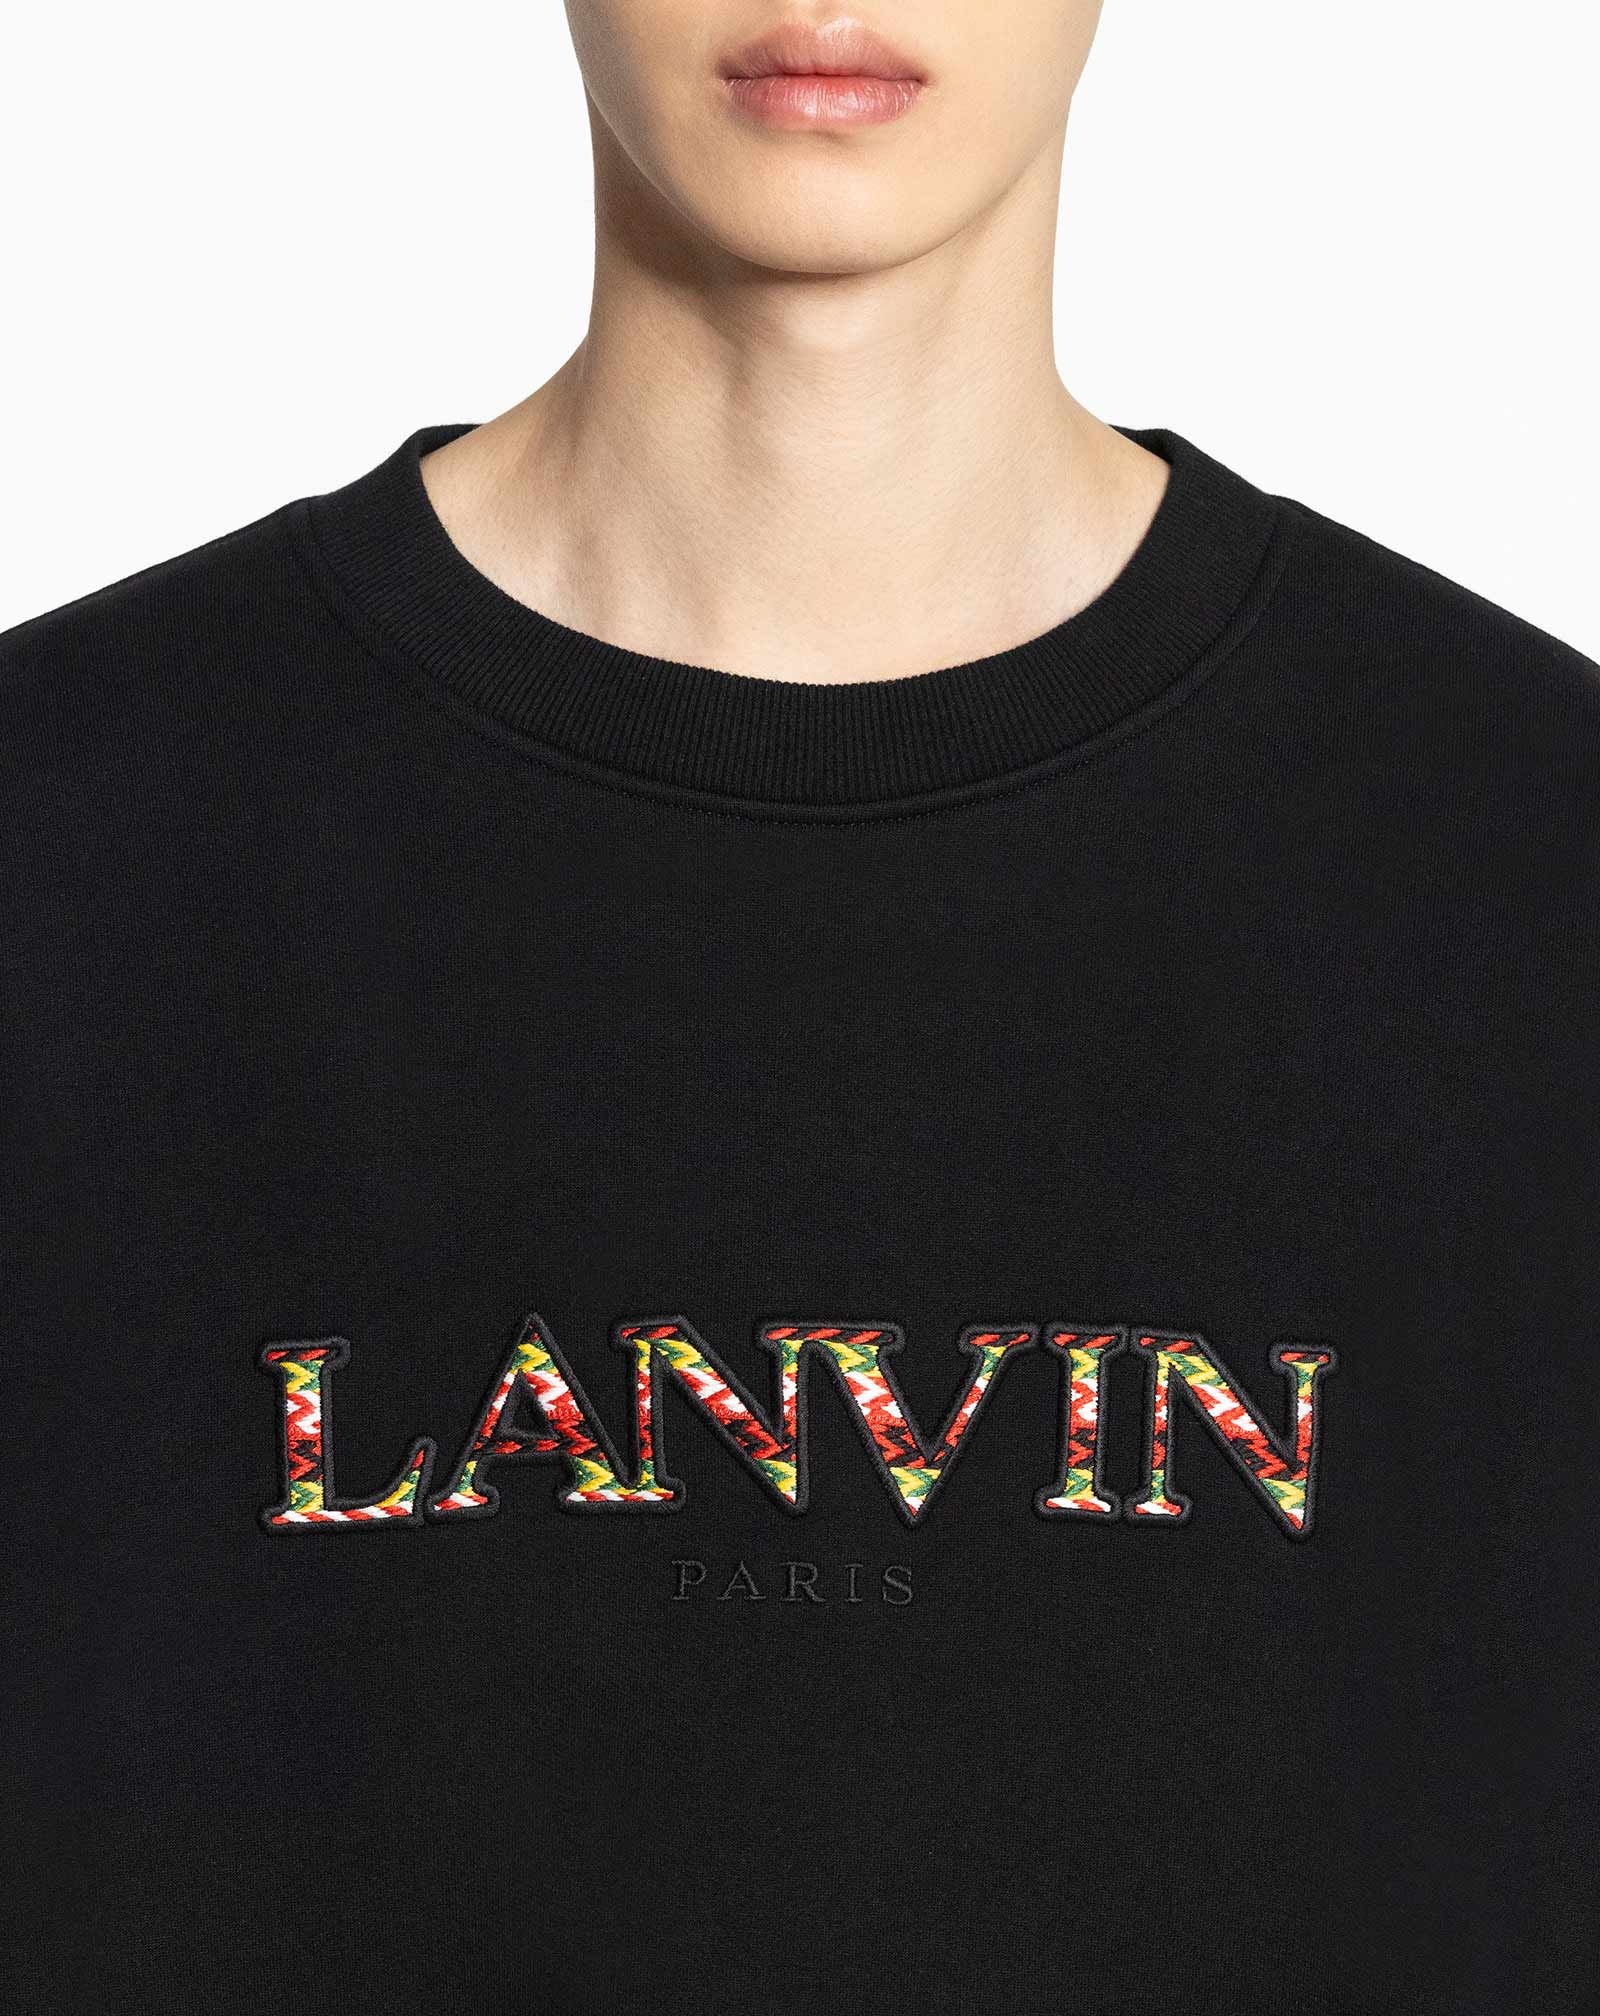 OVERSIZED EMBROIDERED LANVIN CURB SWEATSHIRT - 5